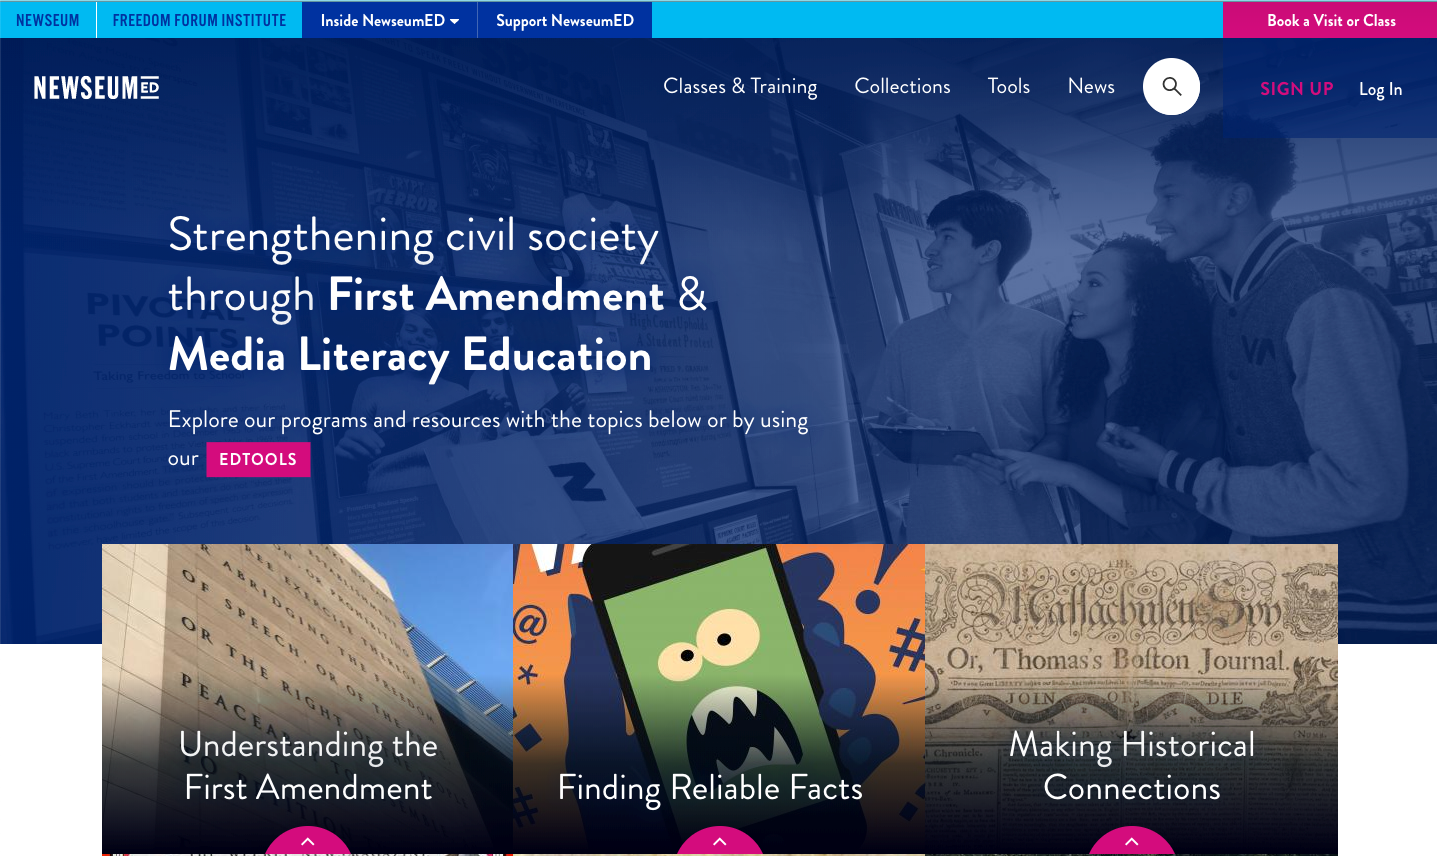 Title: NewseumED website  - Description: Reads: Strengthening civil society through First Amendment & Media Literacy Education. Tabs across the top are Classes & Training, Collections, Tools, and News. There is a link to across the top to Log In and/or Sign Up. Near the bottom of the image are three images with links to Understand the First Amedment, Finding Reliable Facts, and Making Historical Connections.